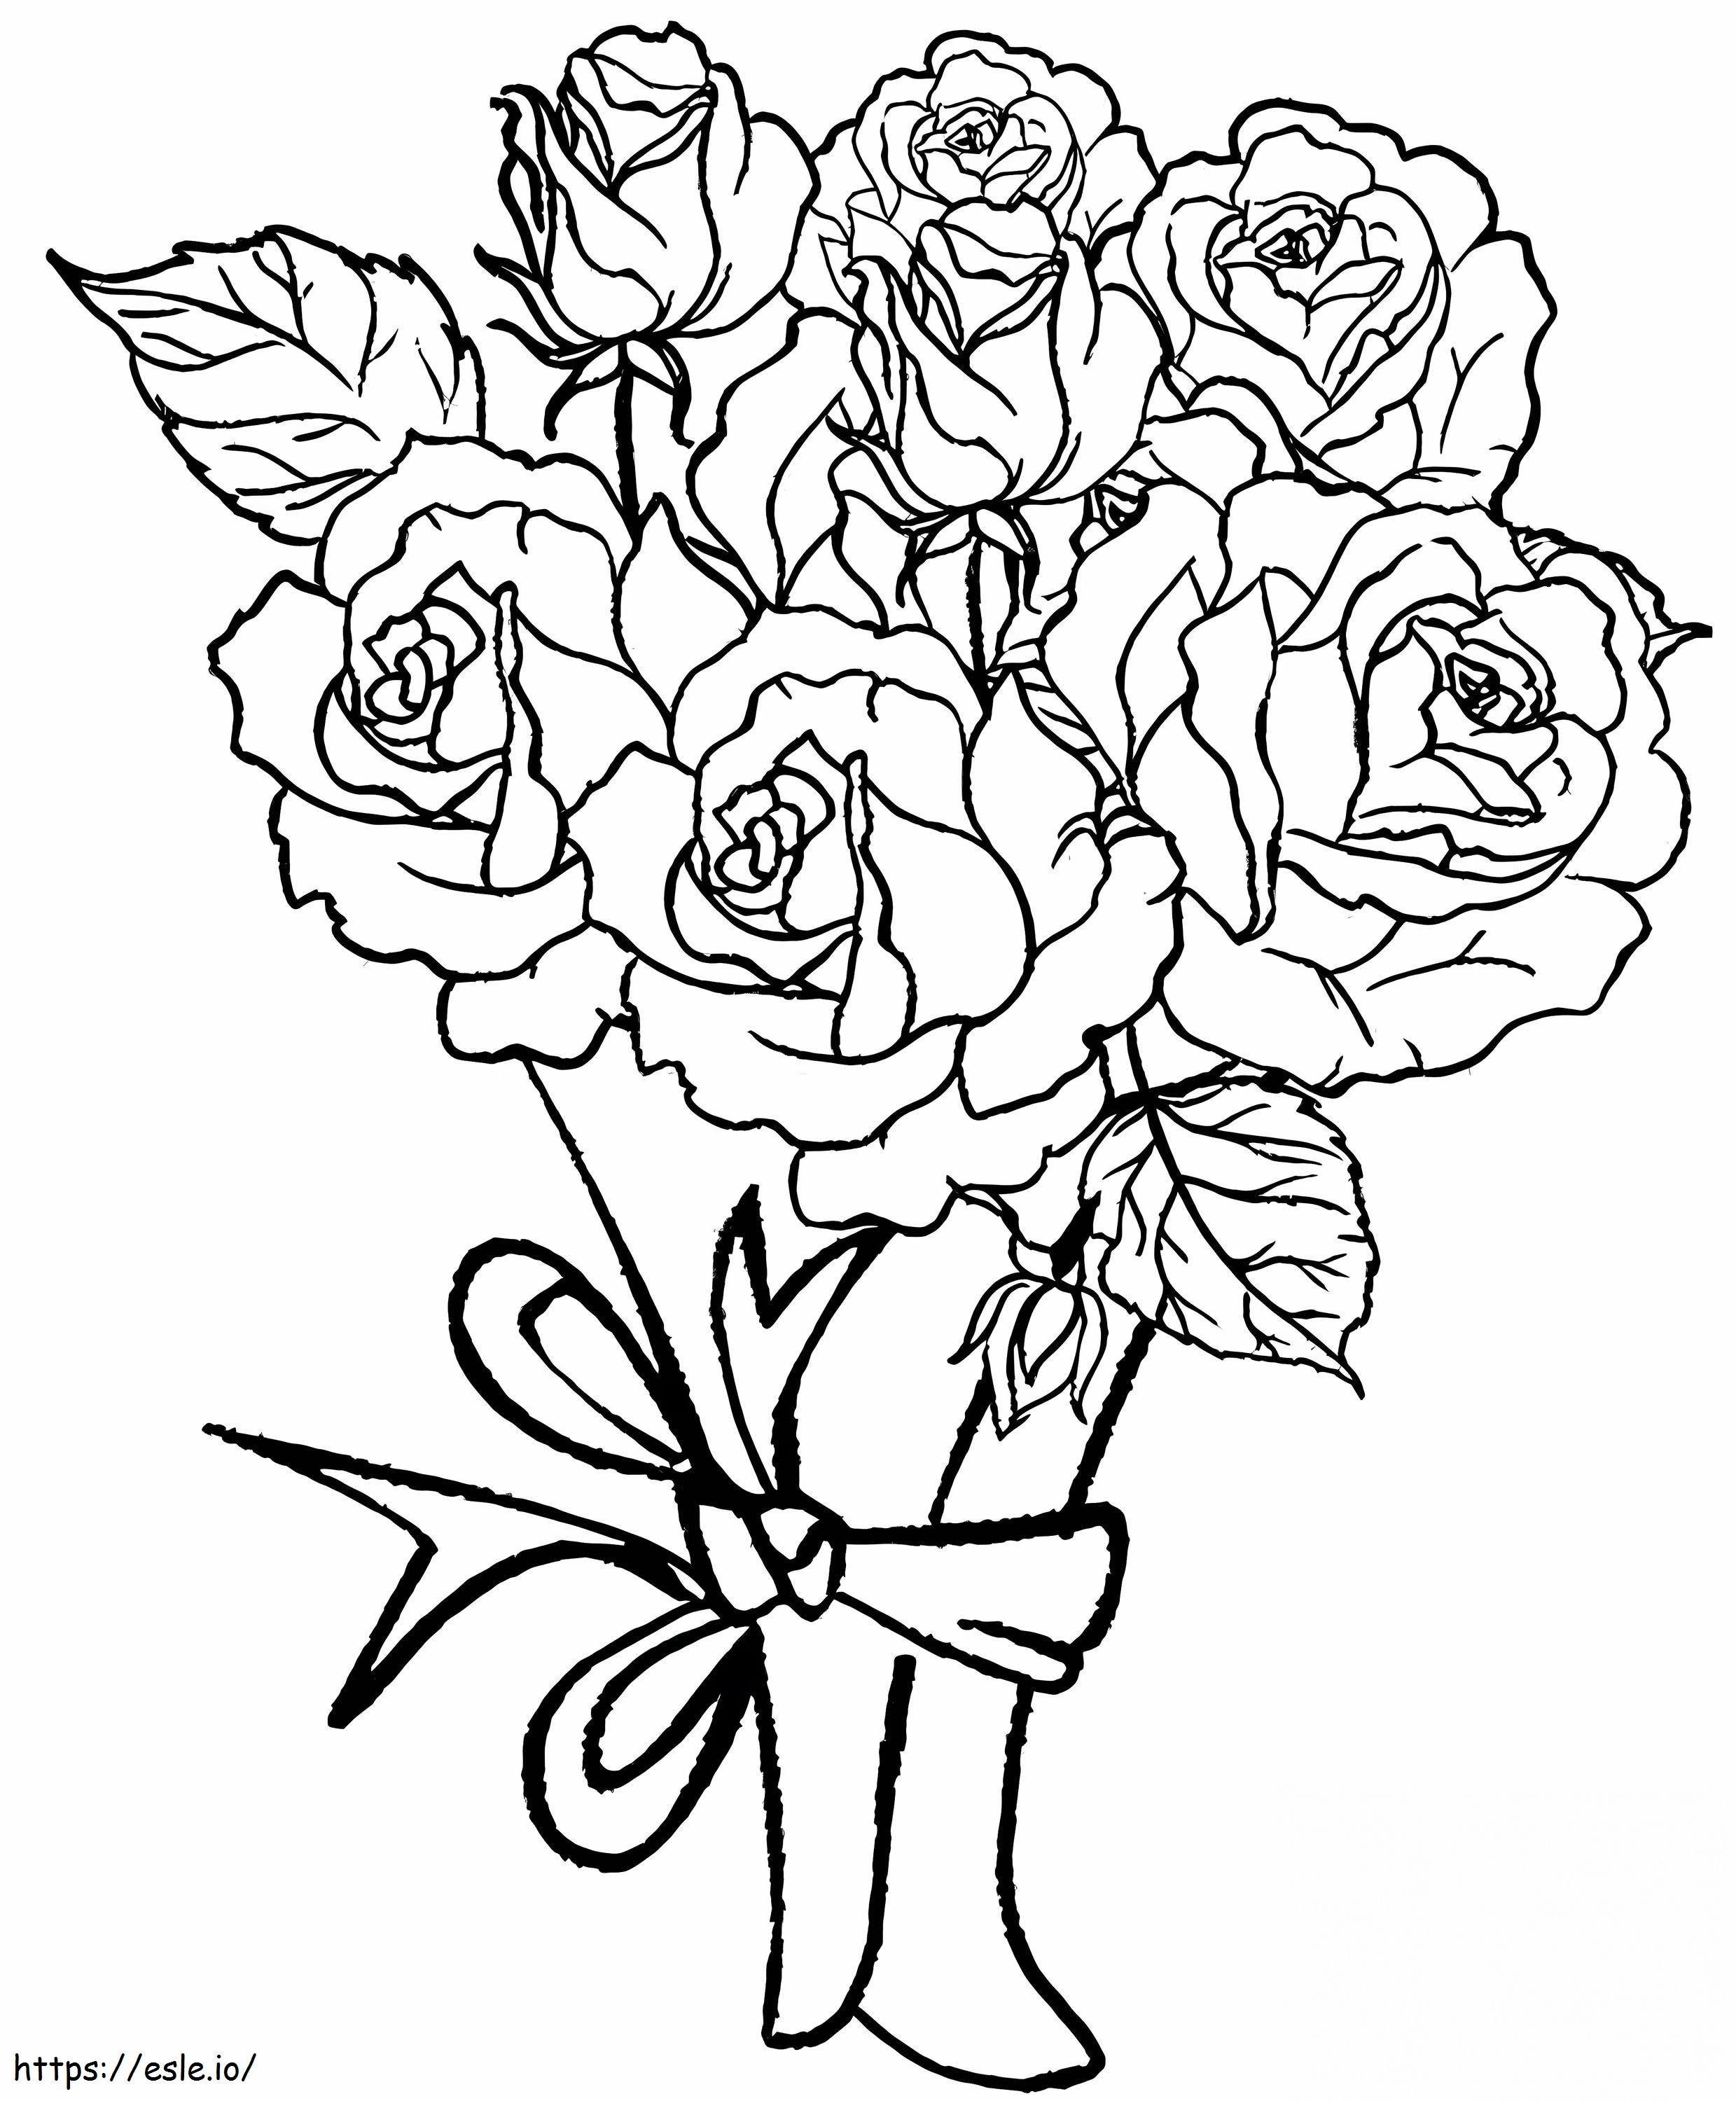 Drawing Bouquet Of Roses coloring page